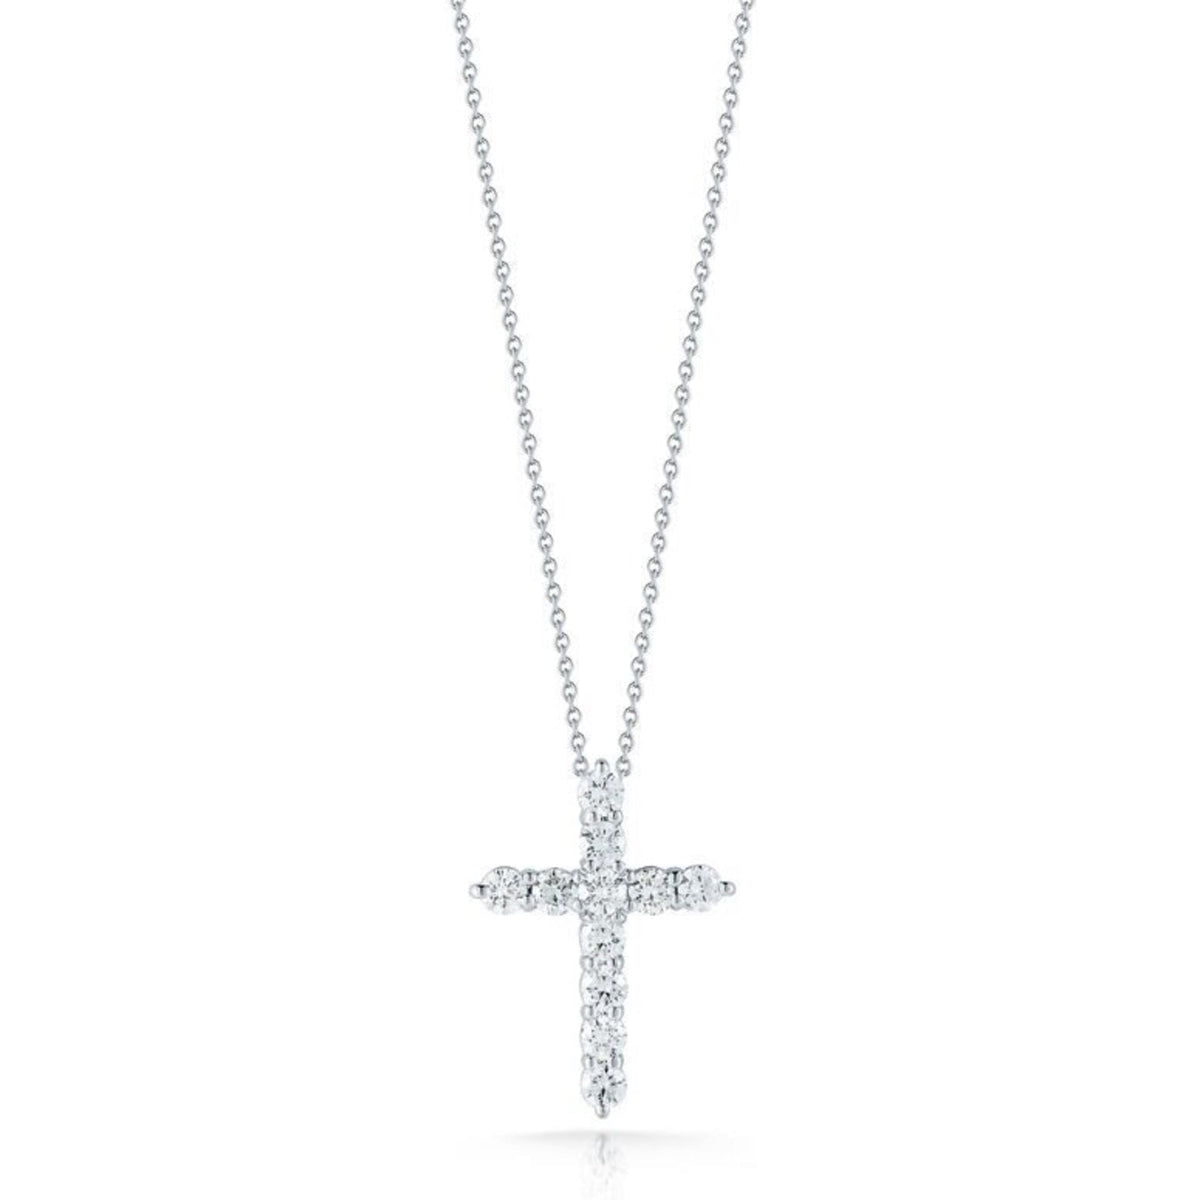 Why is the Diamond Cross Necklace So Trendy? – Robinson's Jewelers